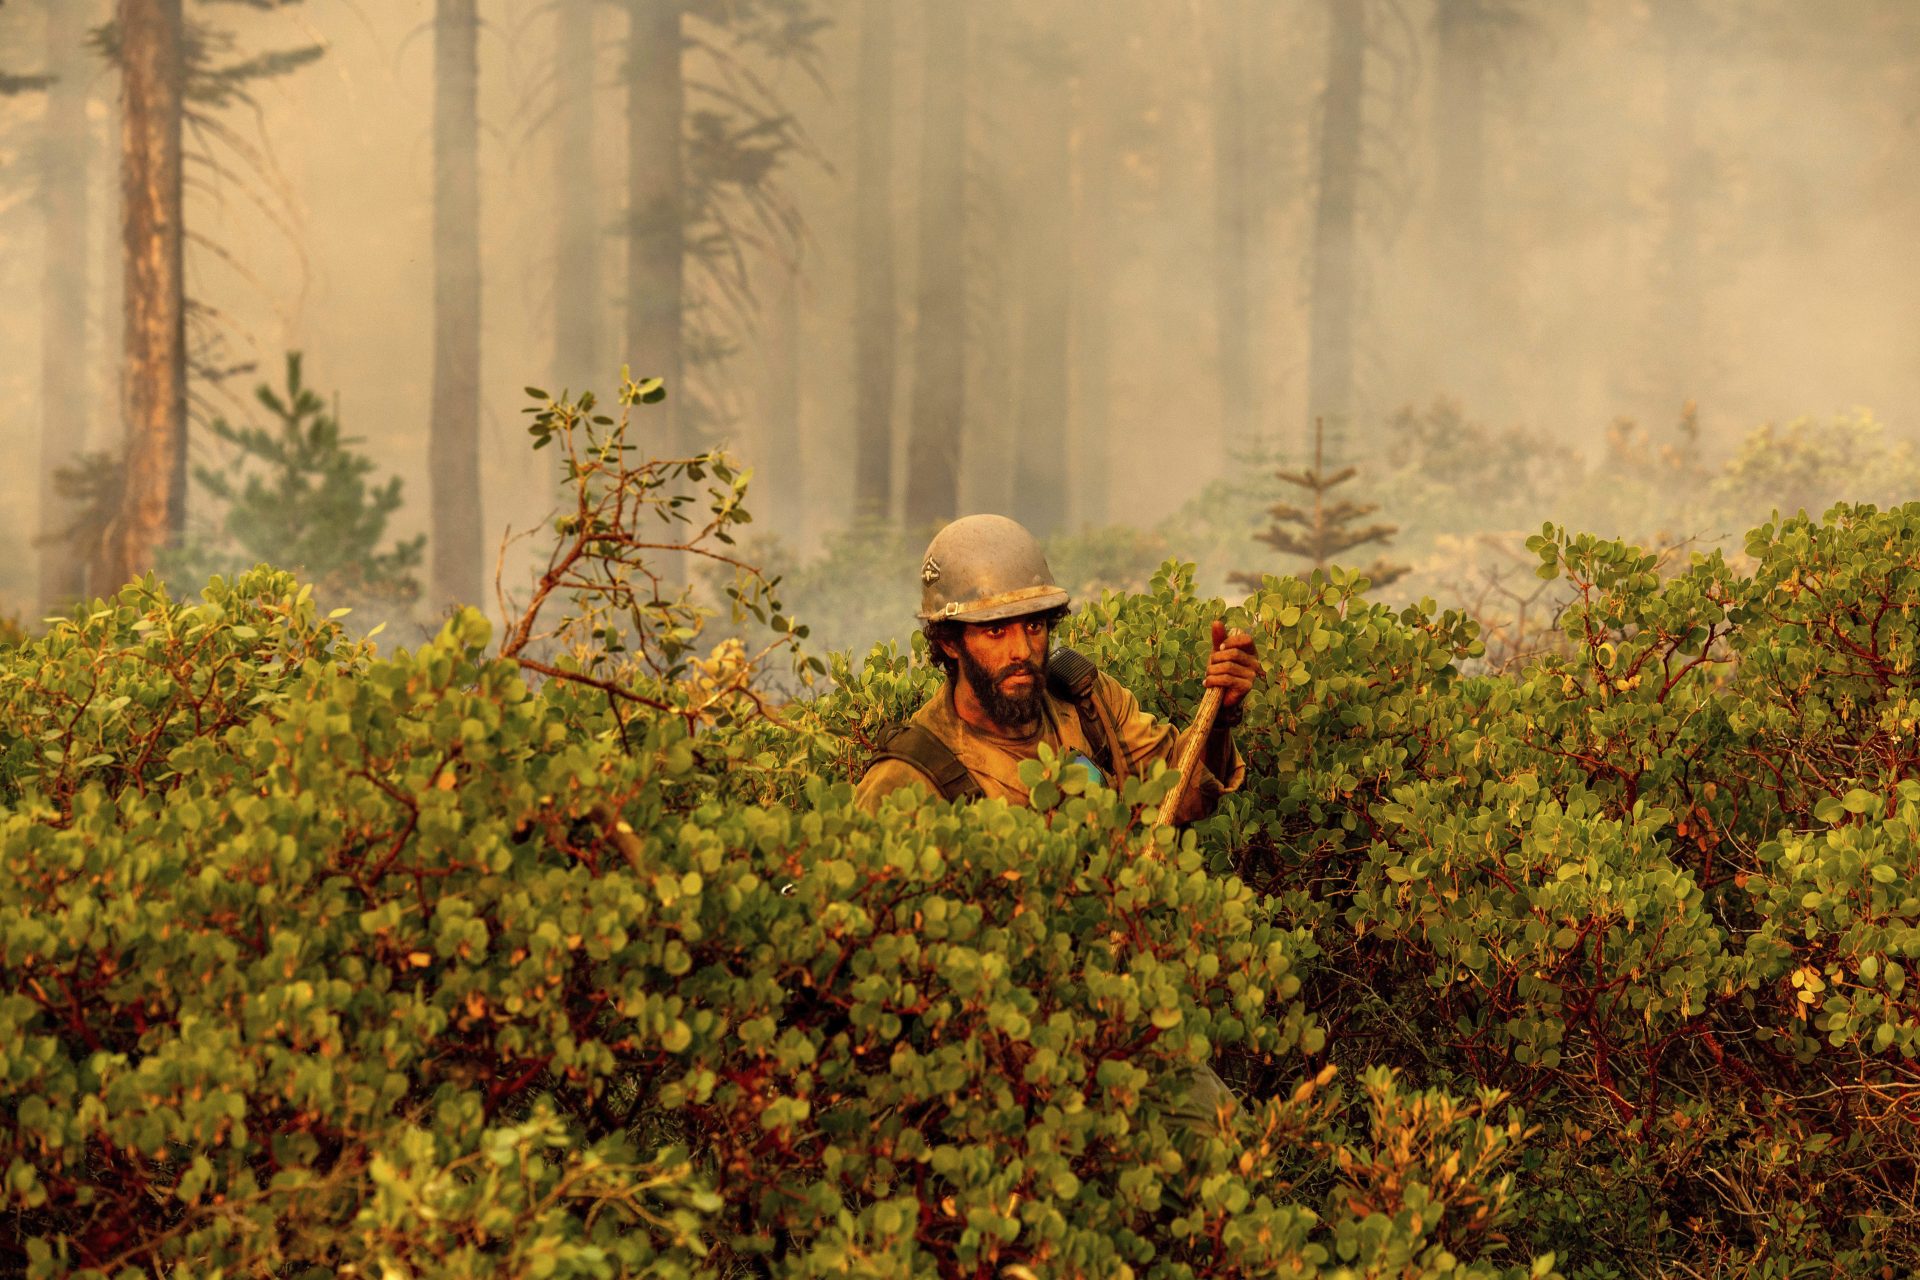 Firefighter Cody Carter battles the North Complex Fire in Plumas National Forest, Calif., on Monday, Sept. 14, 2020.